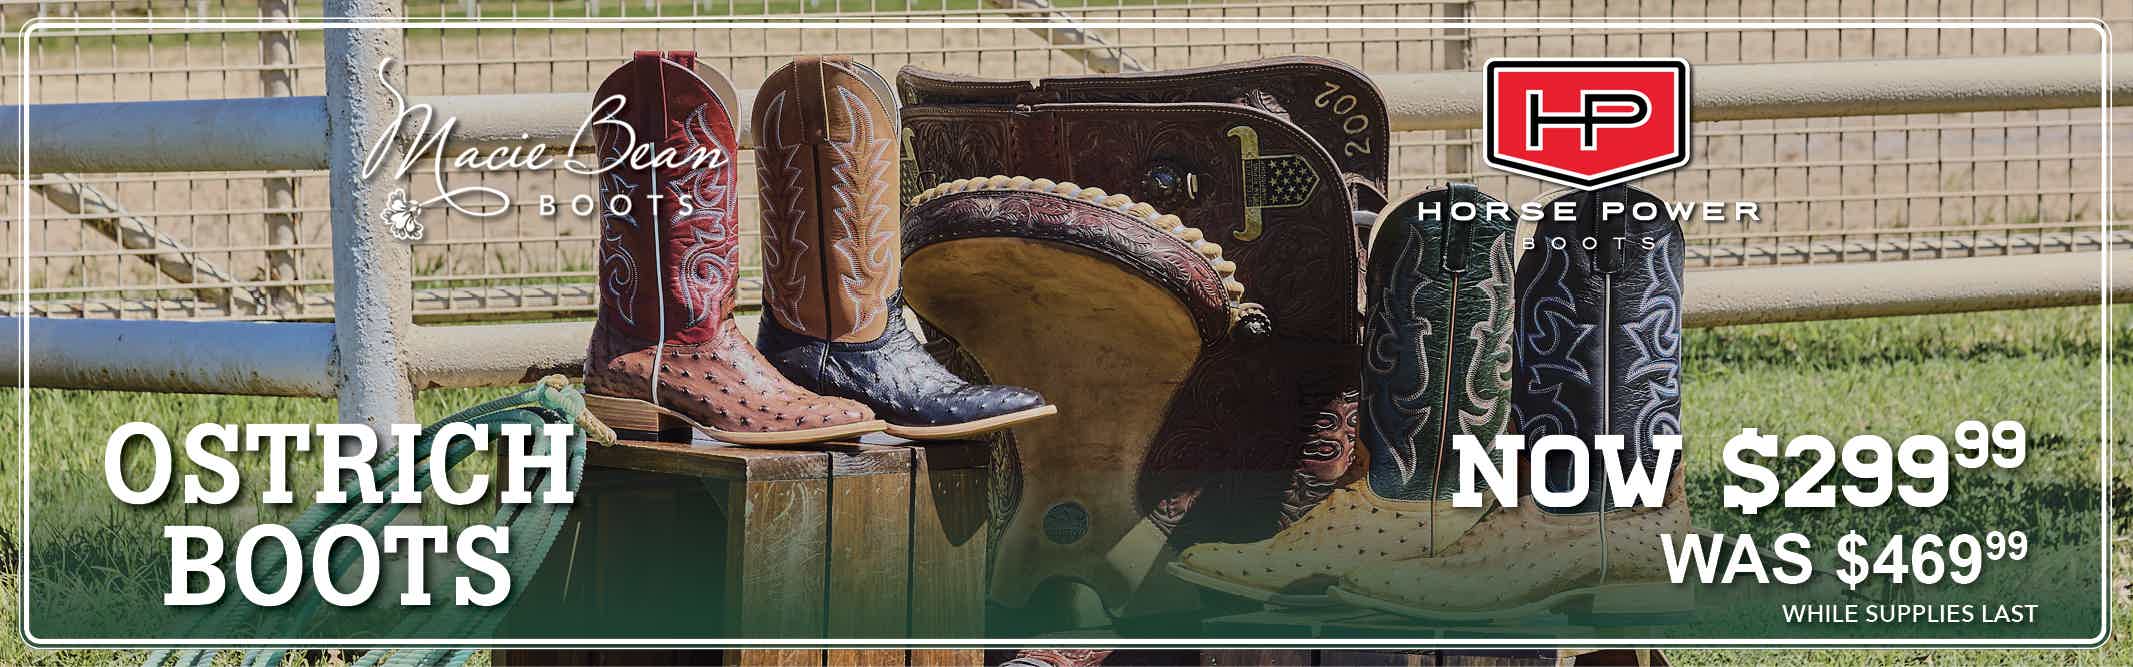 Ostrich Boots by Macie Bean Boots and Horsepower Boots pictured along with text 